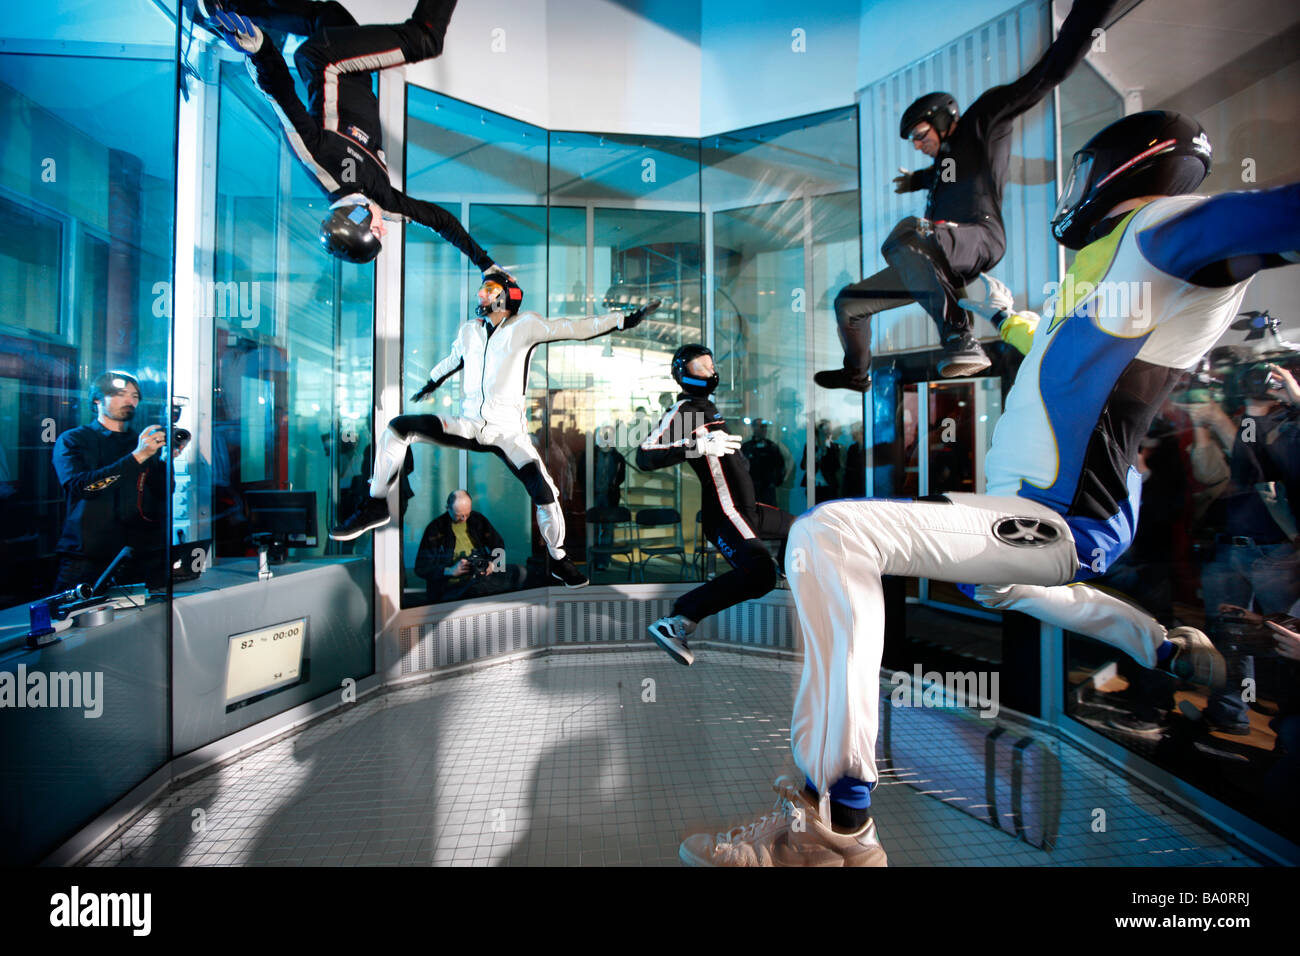 indoor-skydiving-simulator-freefall-simulation-of-a-sky-dive-an-indoor-wind-tunnel-in-bottrop